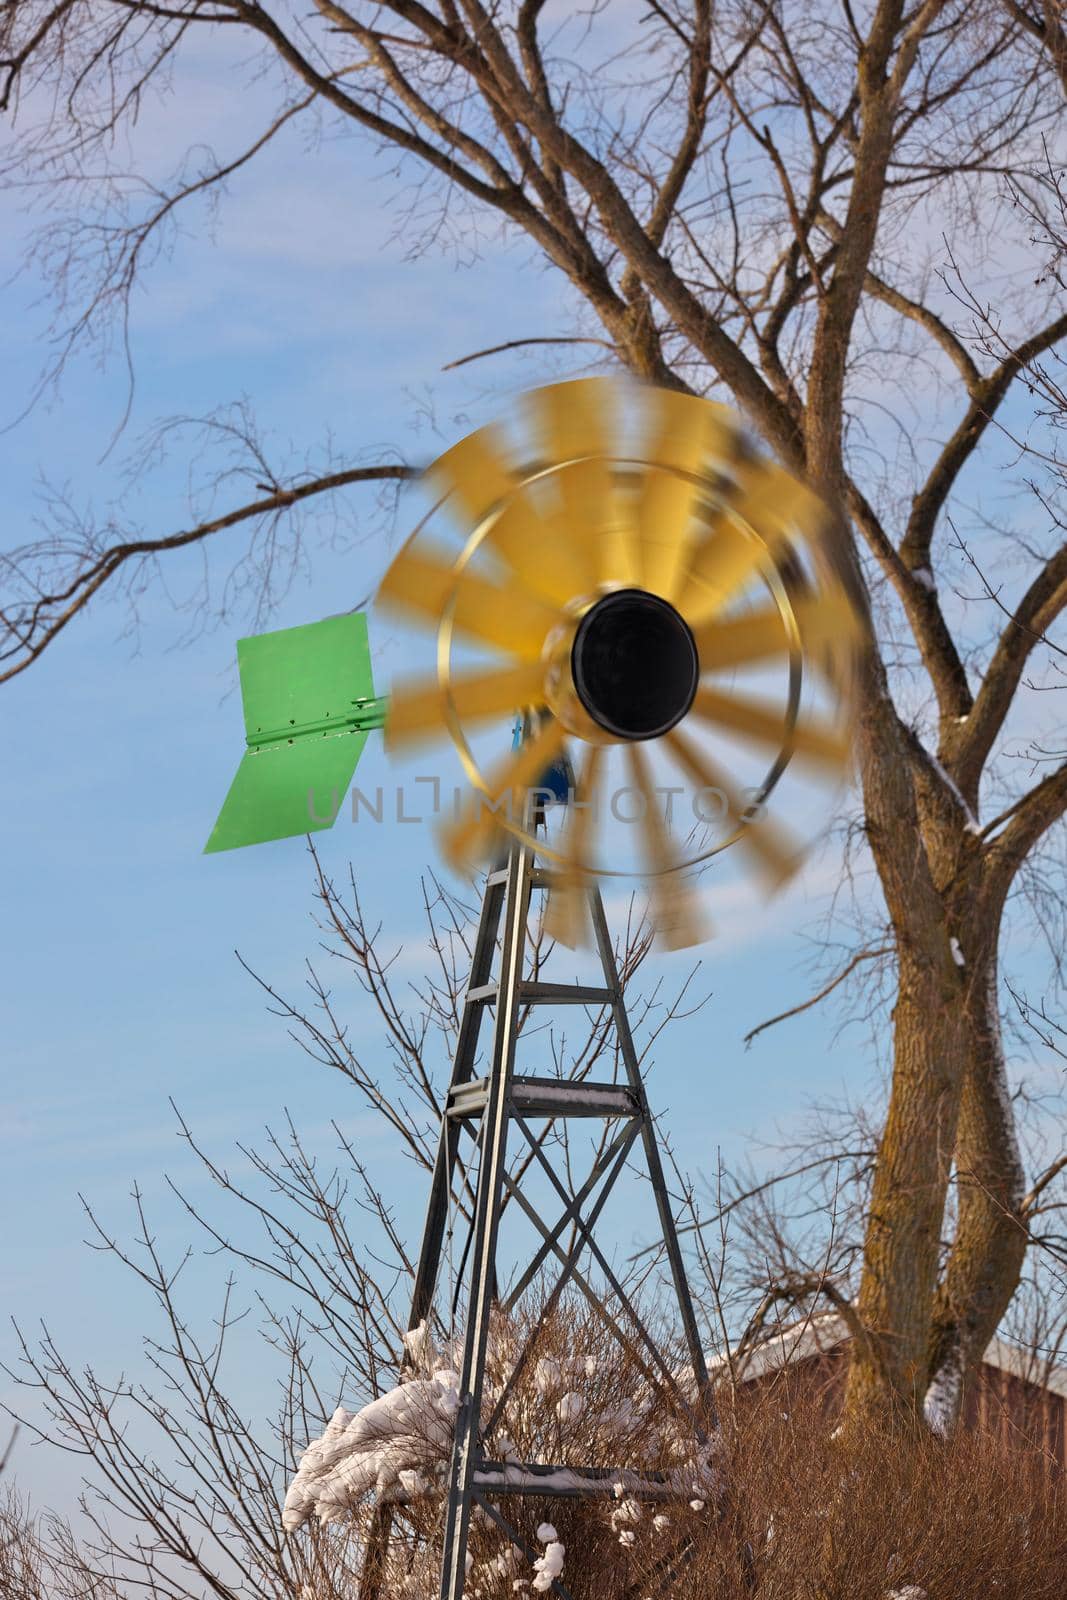 A small Windmill or Wind Turbine in a Rural Setting with Spinning Blades. Windmill has sunflower colors of yellow brown and green. High quality photo